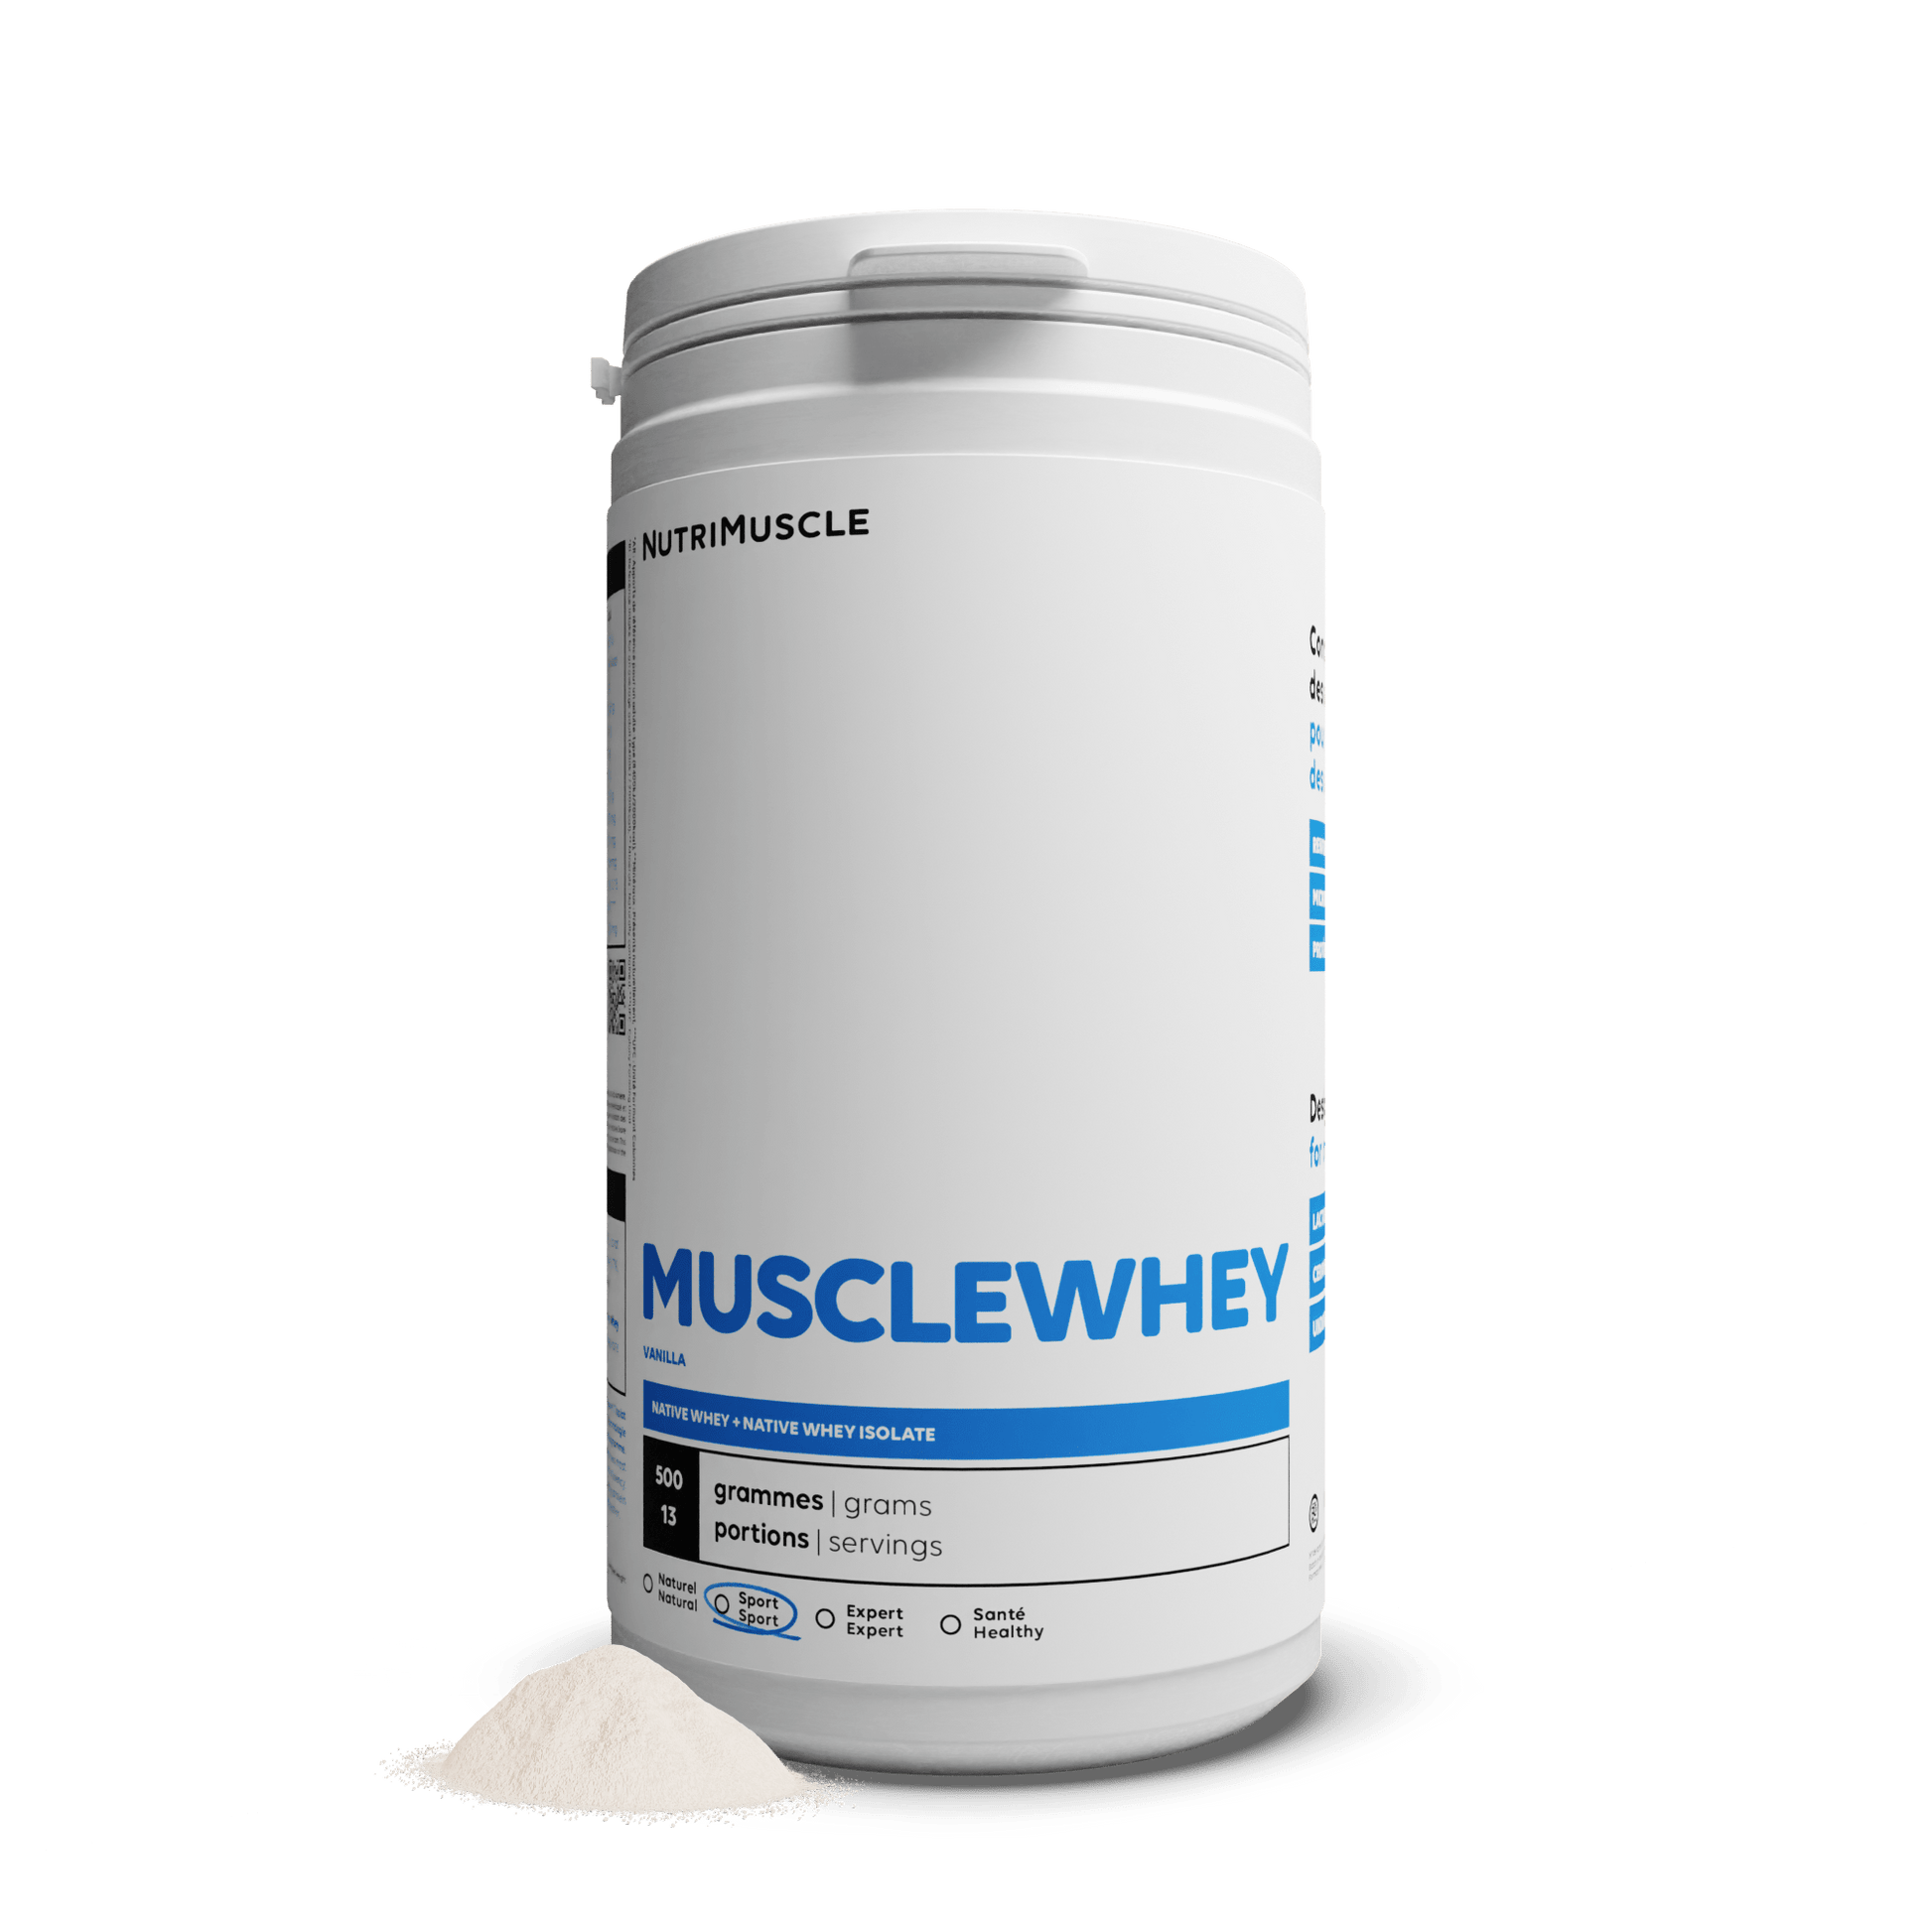 Nutrimuscle Protéines Vanille / 500 g Musclewhey - Mix Protein